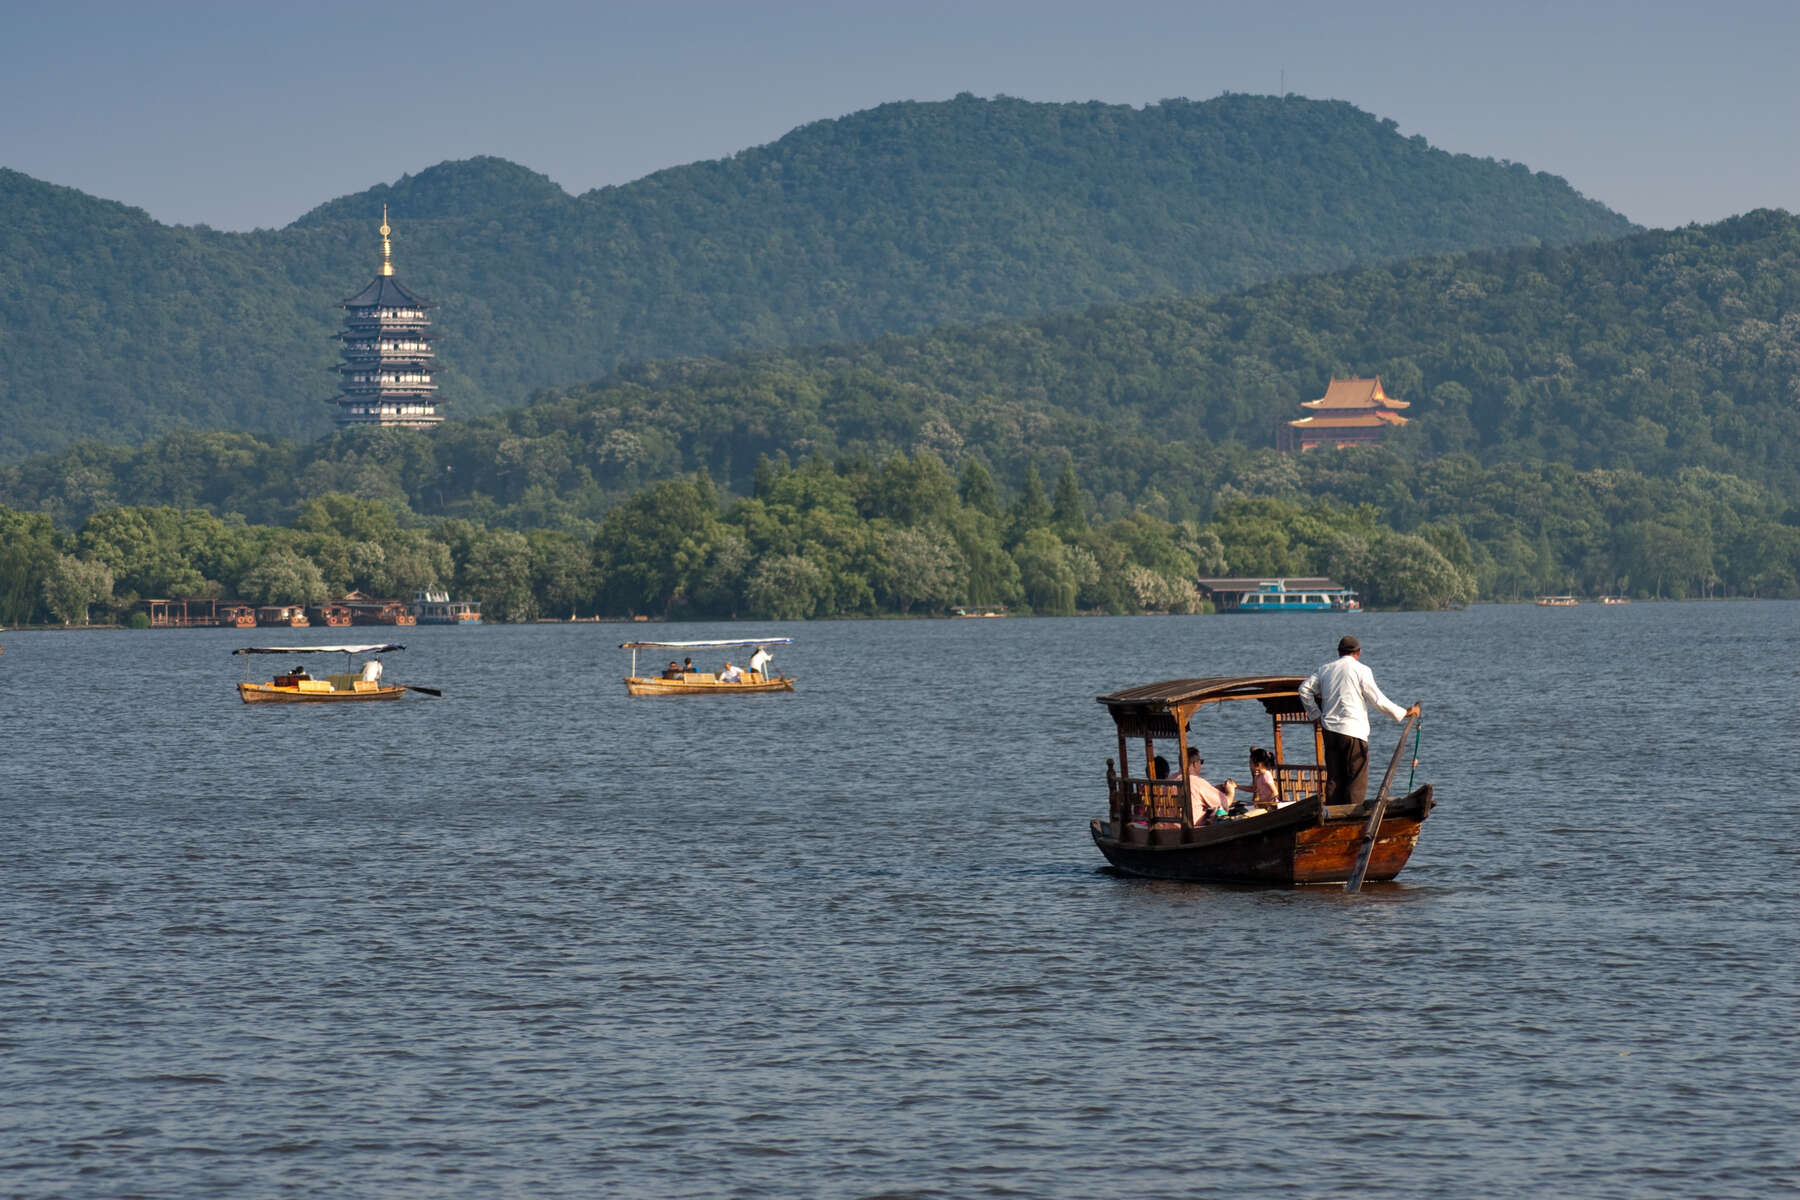 Four boats sailing in a lake. In the distance, two multistory structures standout on a mountain completely covered in trees.